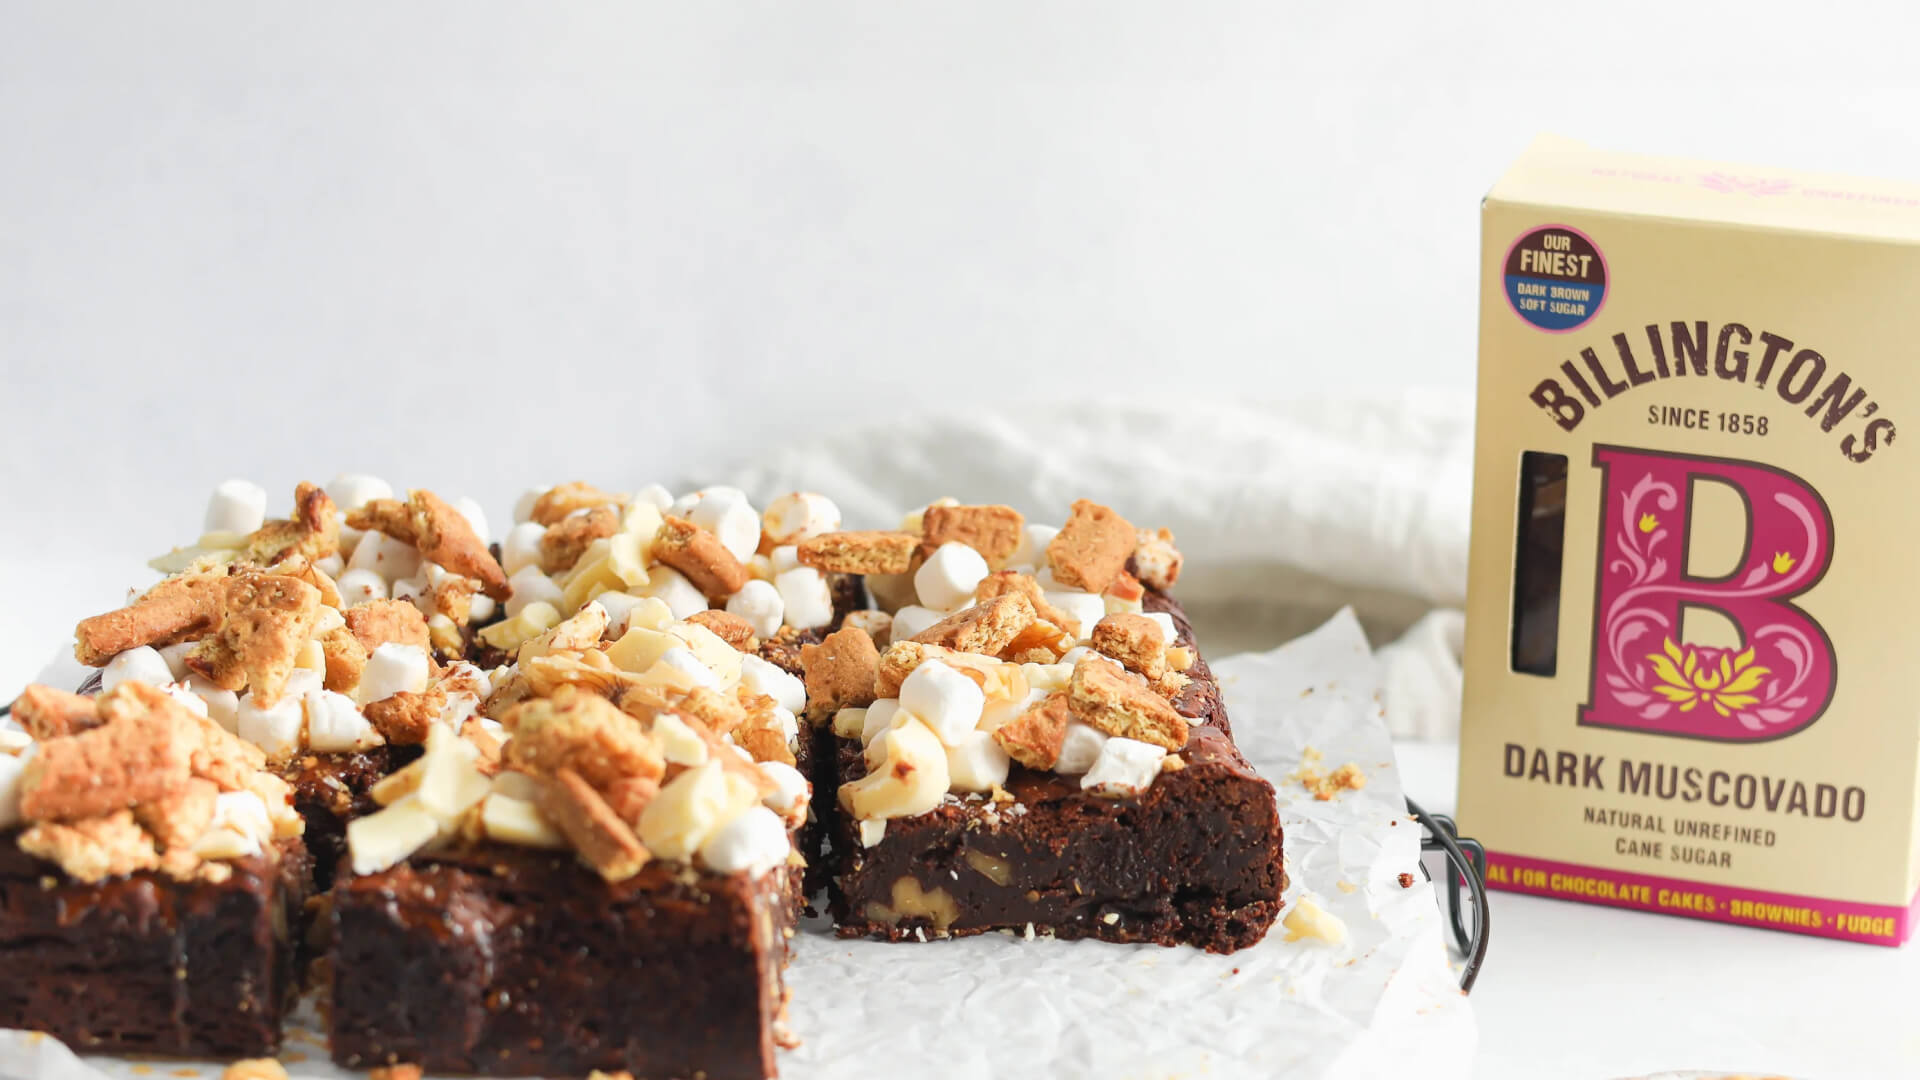 A pack of Billington's Dark Muscovado Sugar next to a delicious looking traybake of rocky road brownies.